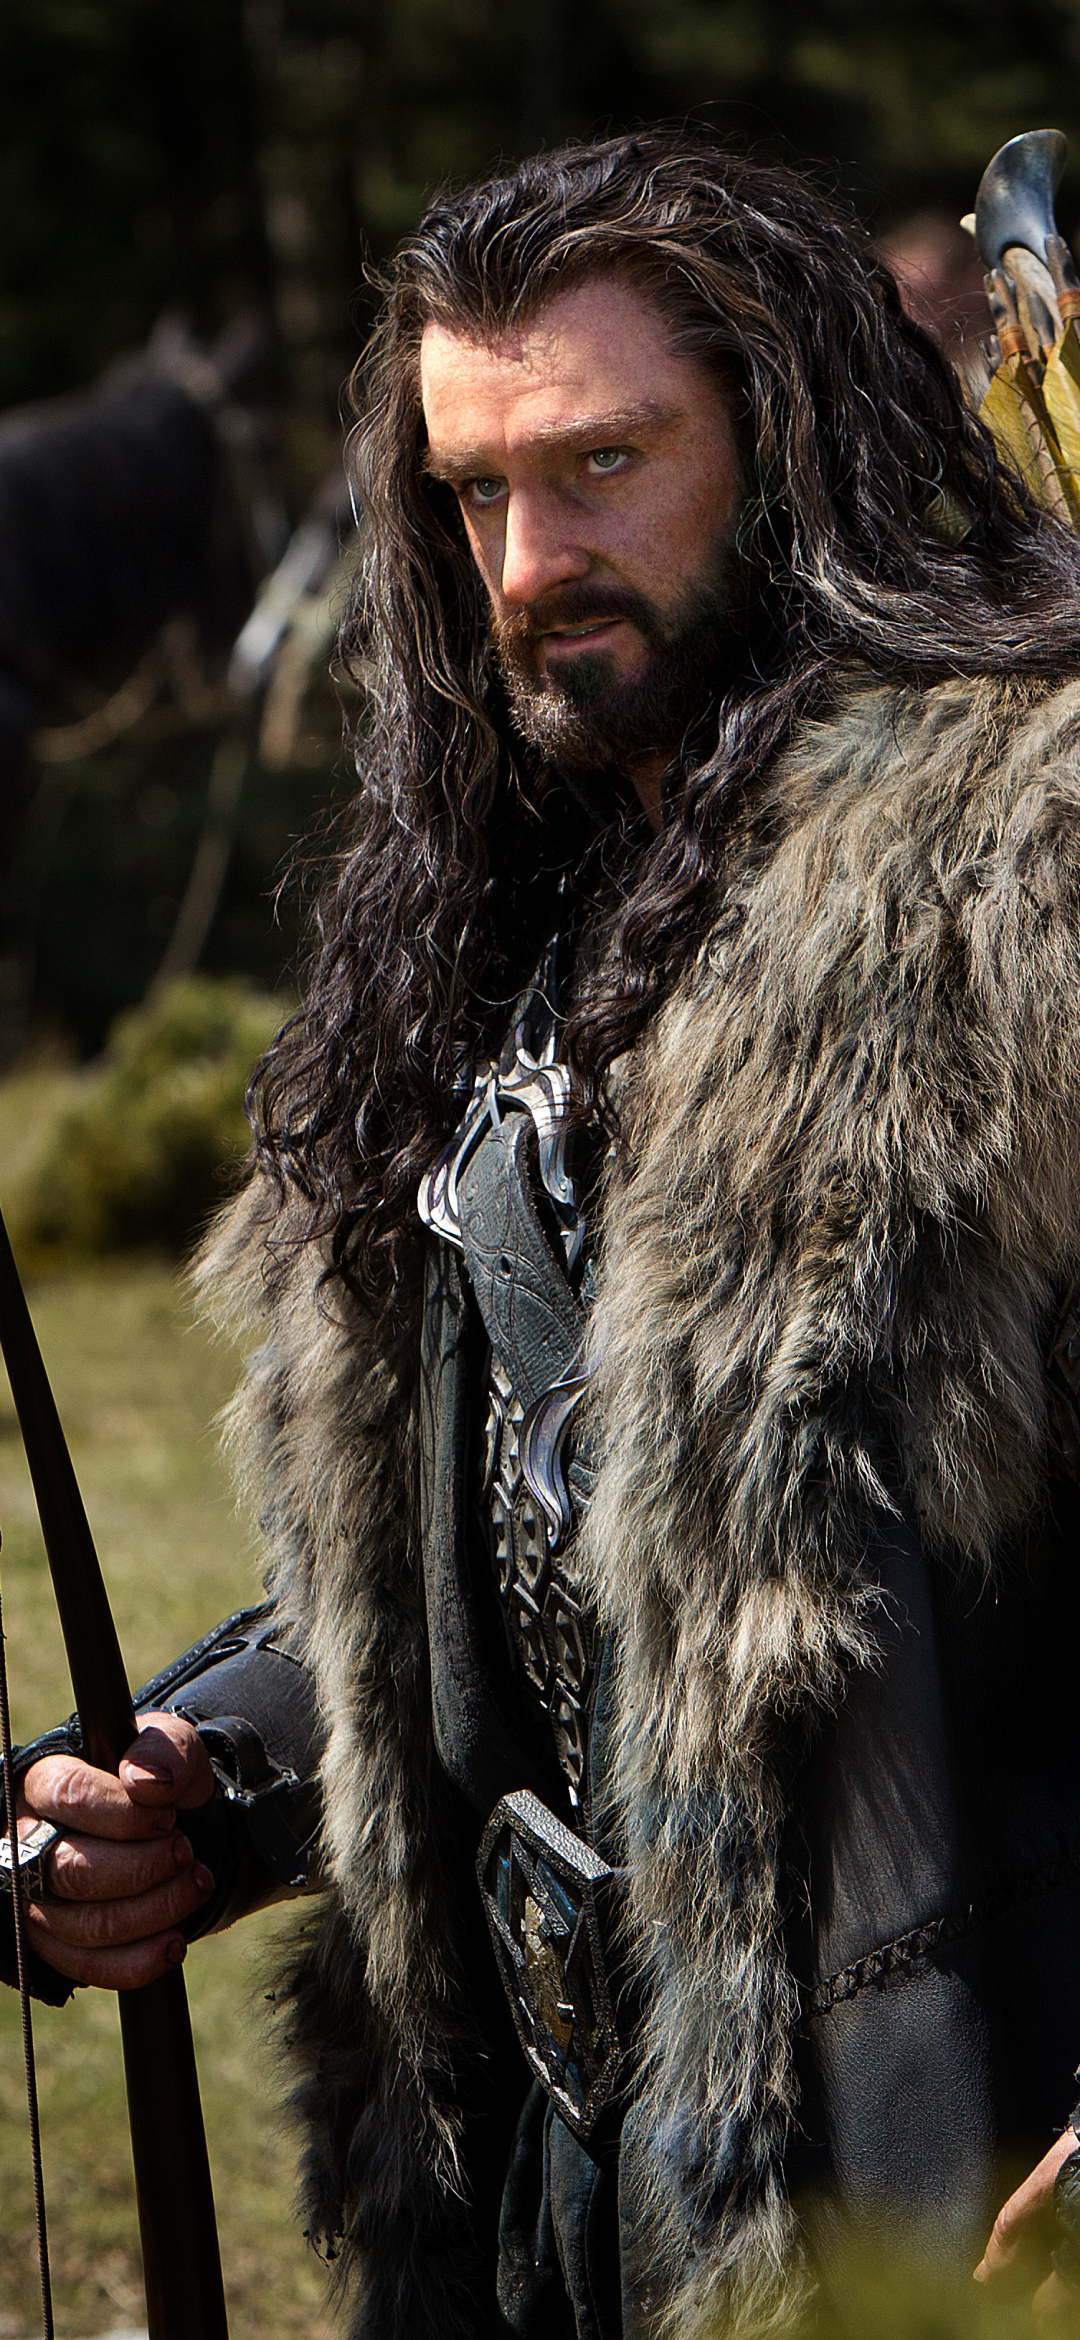 movie, the hobbit: an unexpected journey, richard armitage, long hair, warrior, beard, the hobbit, thorin oakenshield, the lord of the rings